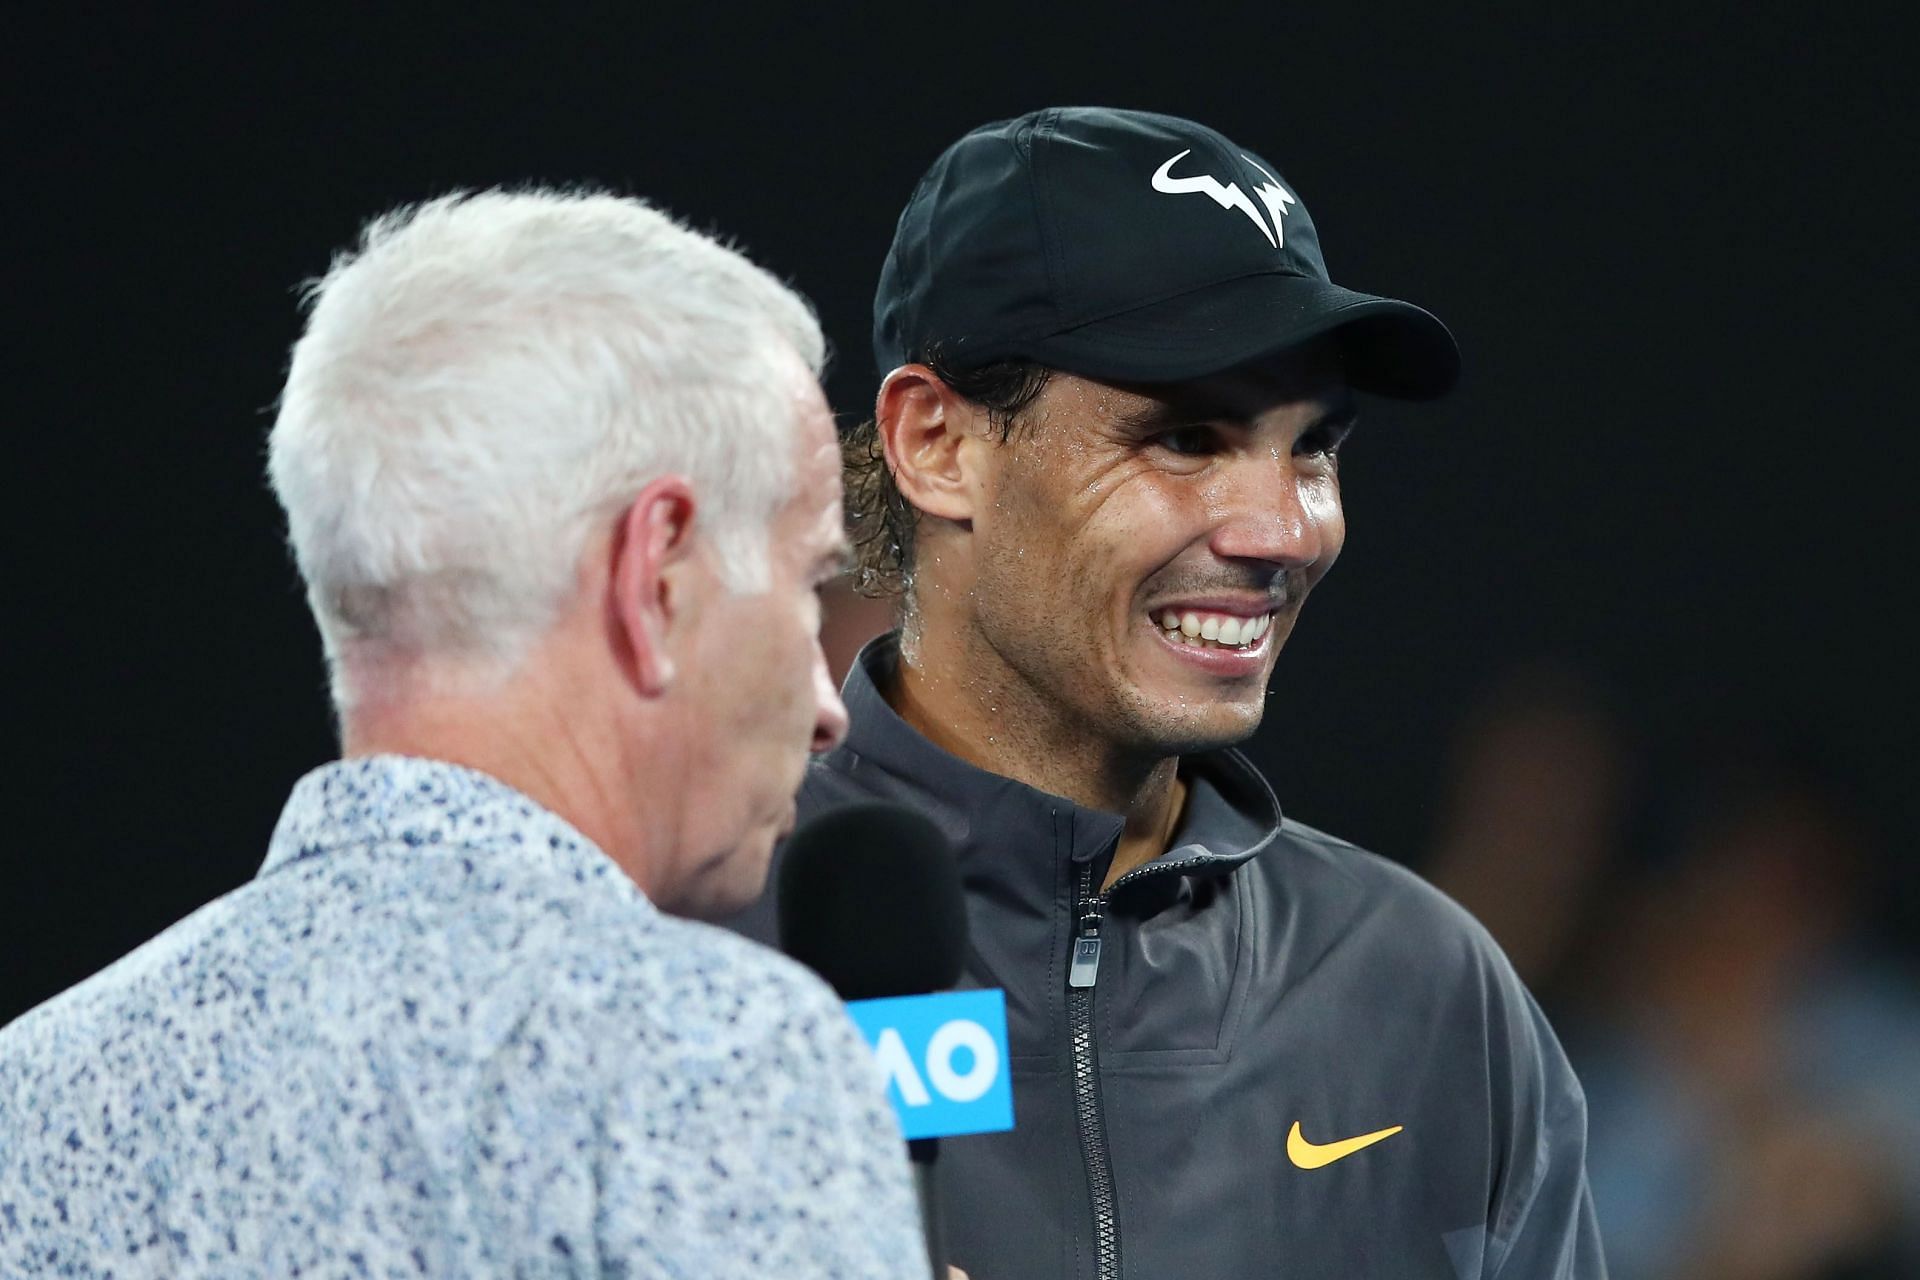 Rafael Nadal (R) during a post-match interview at the Australian Open.